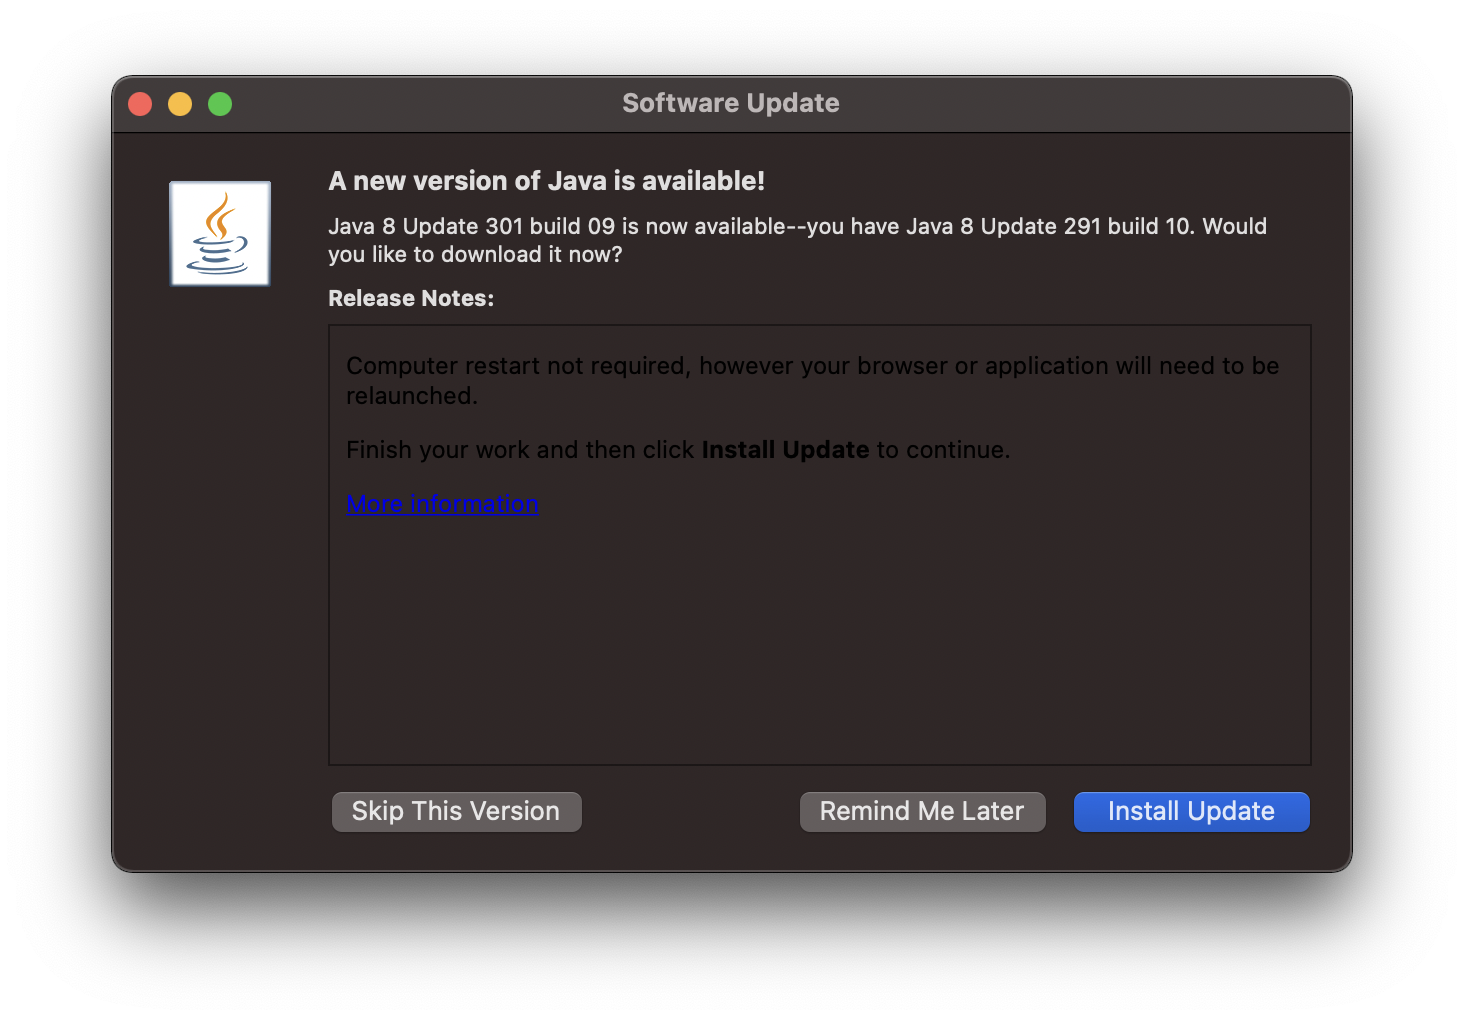 A new version of Java is available